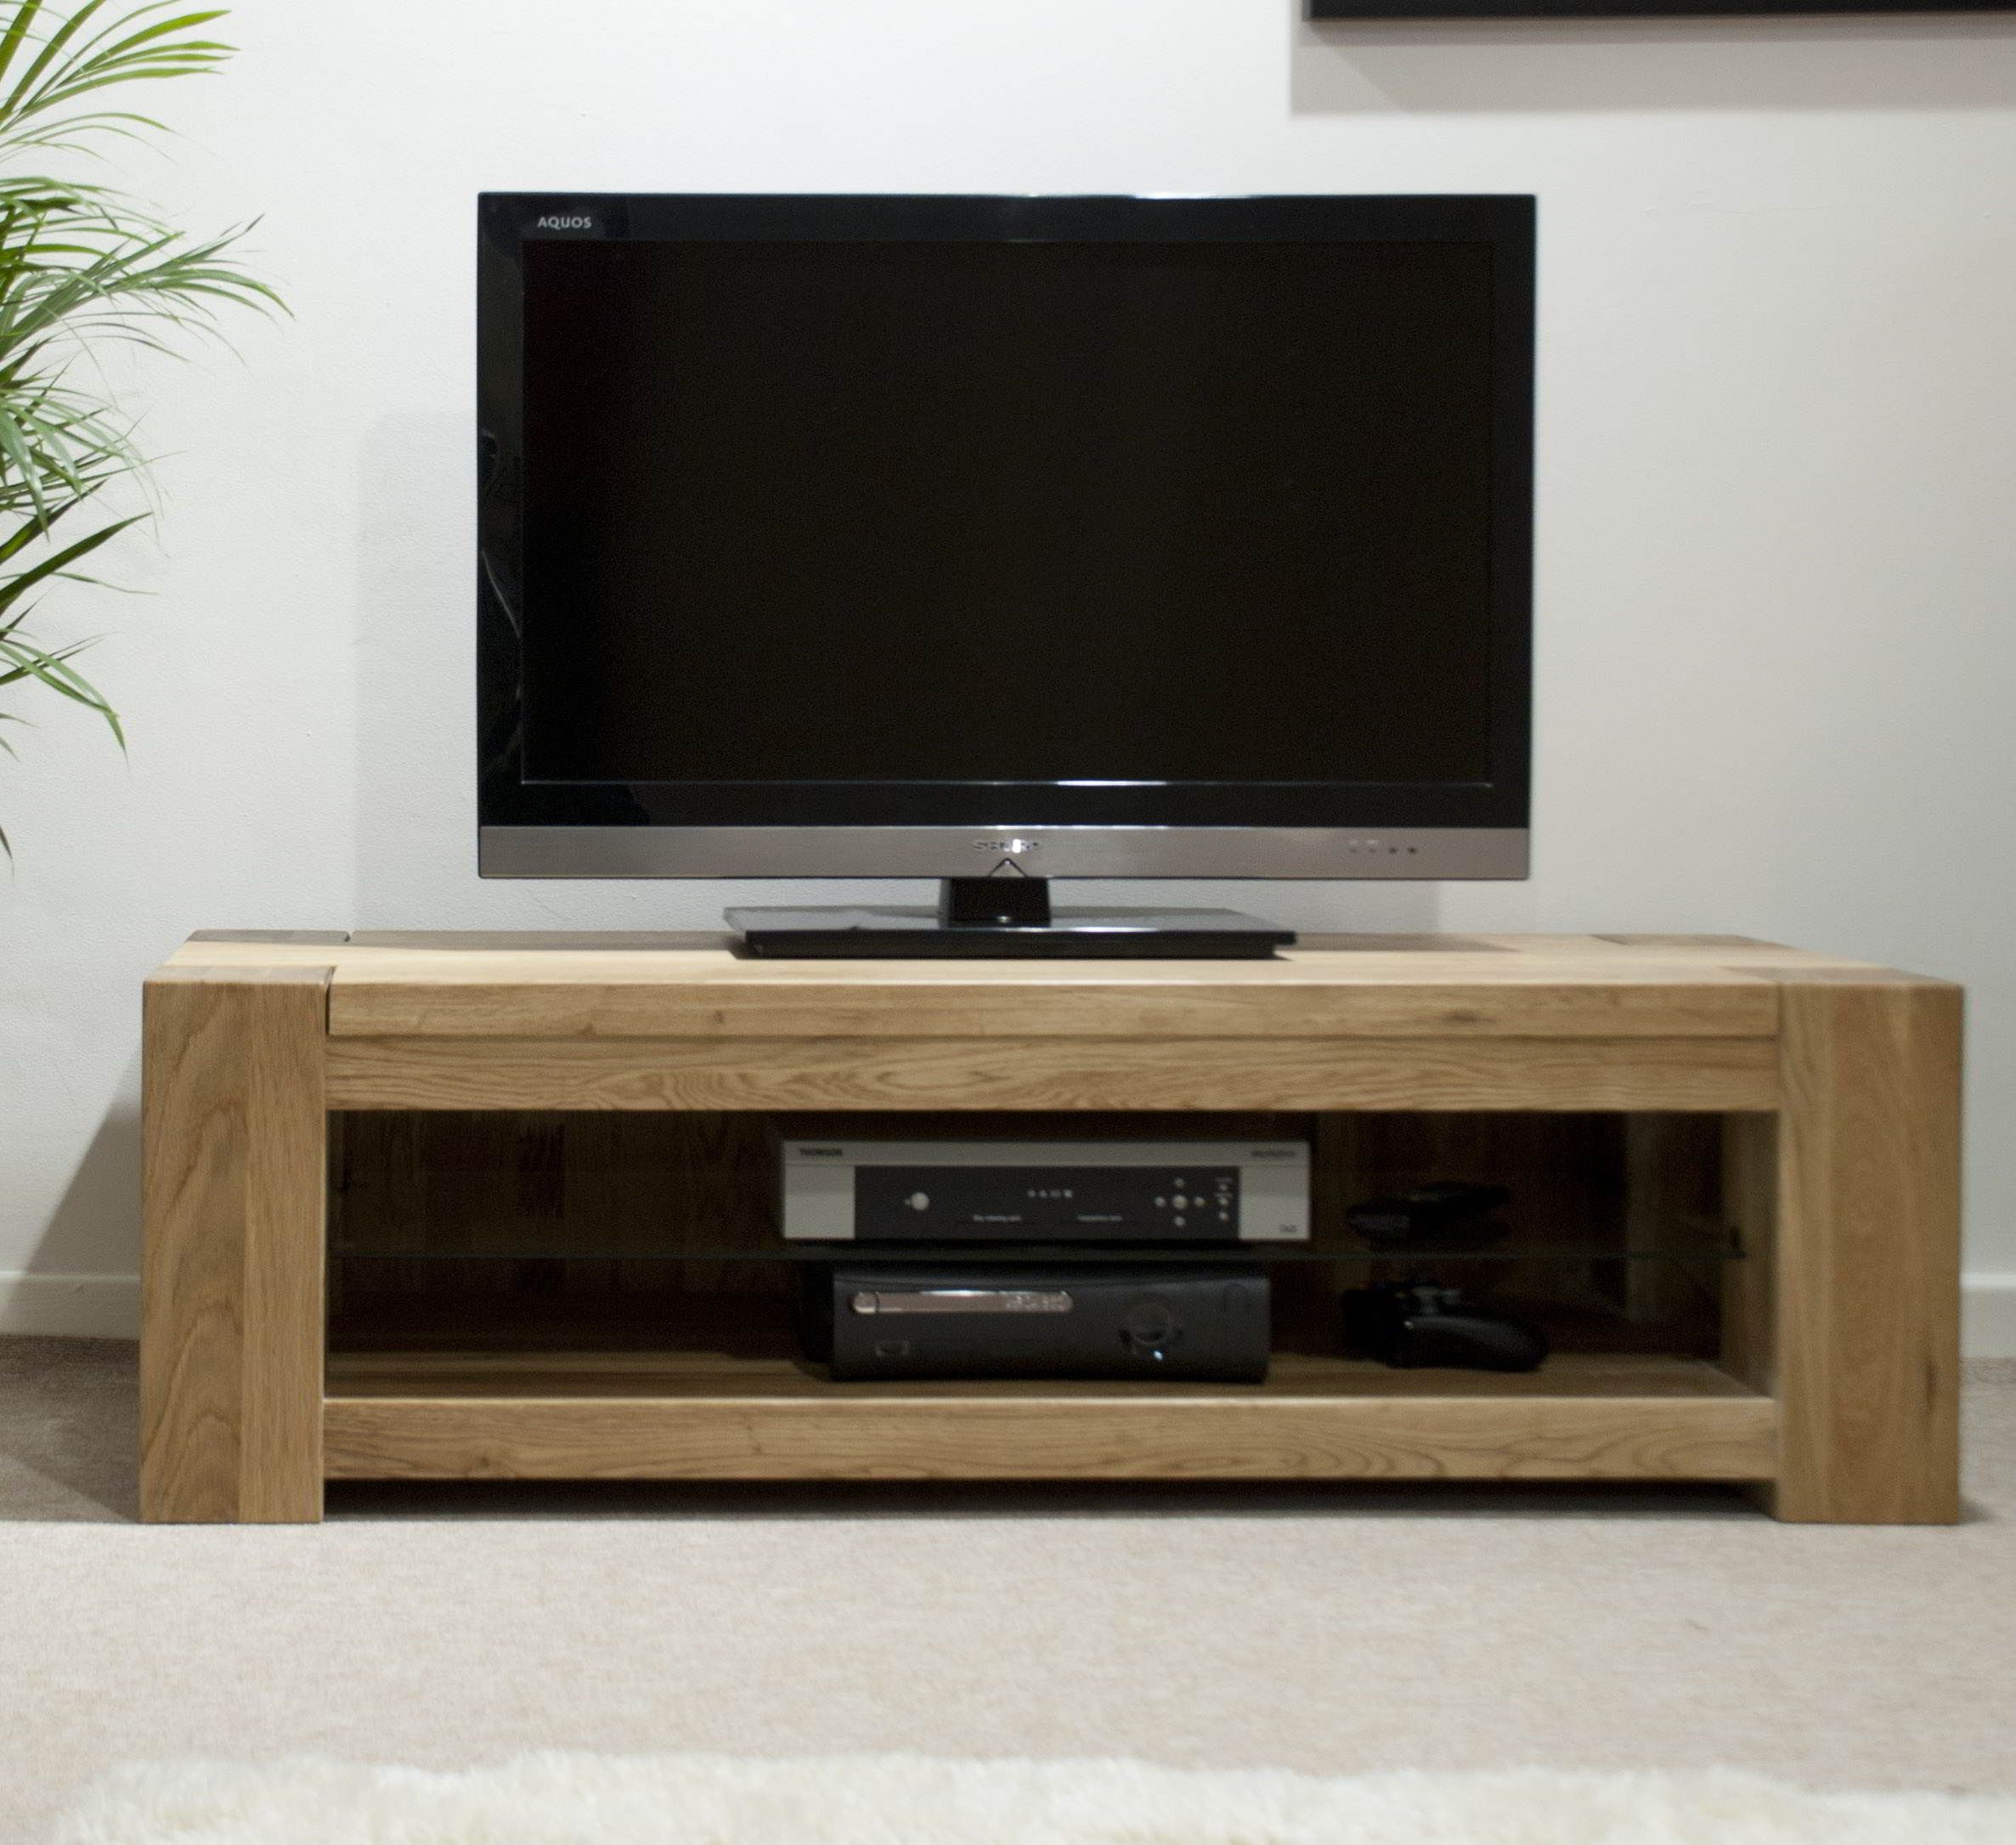 Padova Solid Oak Furniture Plasma Television Cabinet Stand With Regard To Long Low Tv Stands (View 5 of 15)